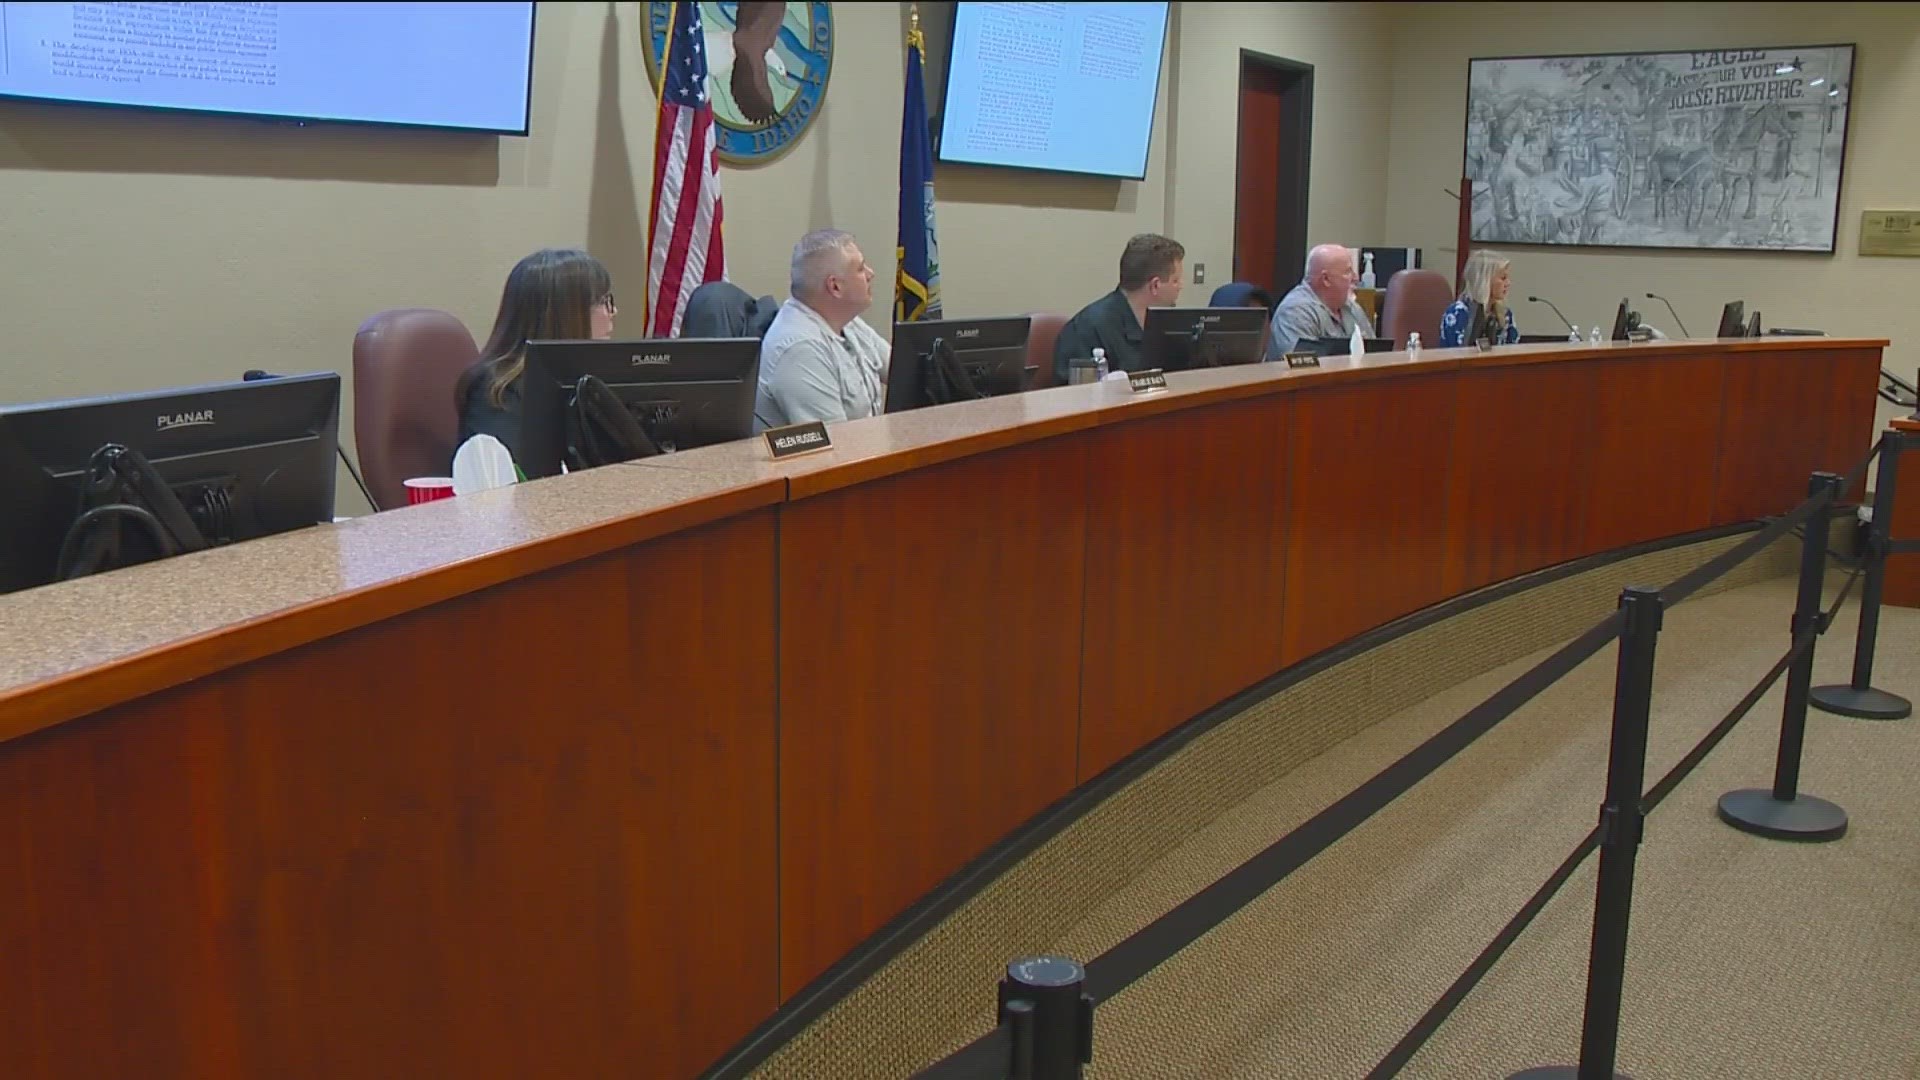 City councilmembers voted 3-1 in favor of annexation, saying annexing the development gives the city control over what happens in the nearby foothills.